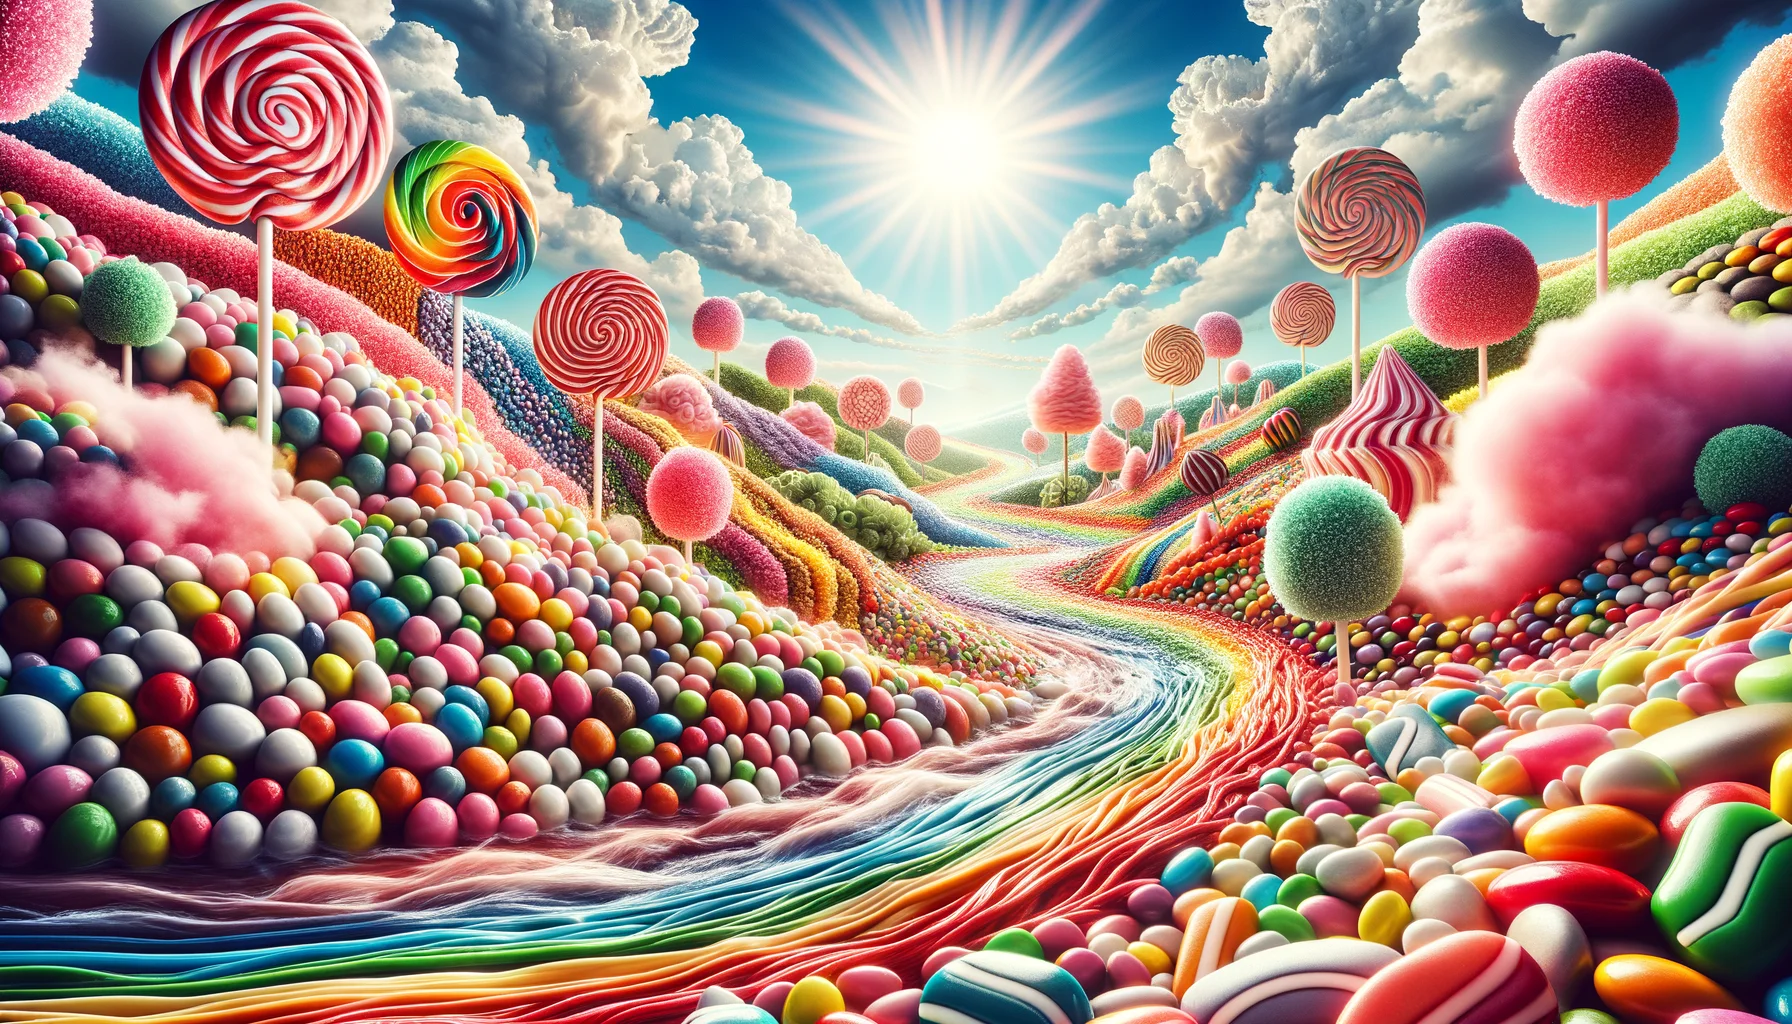 Create a high-quality, realistic, and somewhat humorous image of a candy-filled scenario. Picture a landscape composed entirely of sugar confectionery - lollipops trees swaying in a breeze, bushes of fluffy cotton candy, a river of rainbow-colored liquid candy snaking through the scene, hills of hard candy pebbles, and a sky arching overhead draped with a rainbow of licorice stripes. The Sun, a radiant glob of white sugar candy, illuminates the landscape of sugar delight, seemingly captured with a superior DSLR camera.